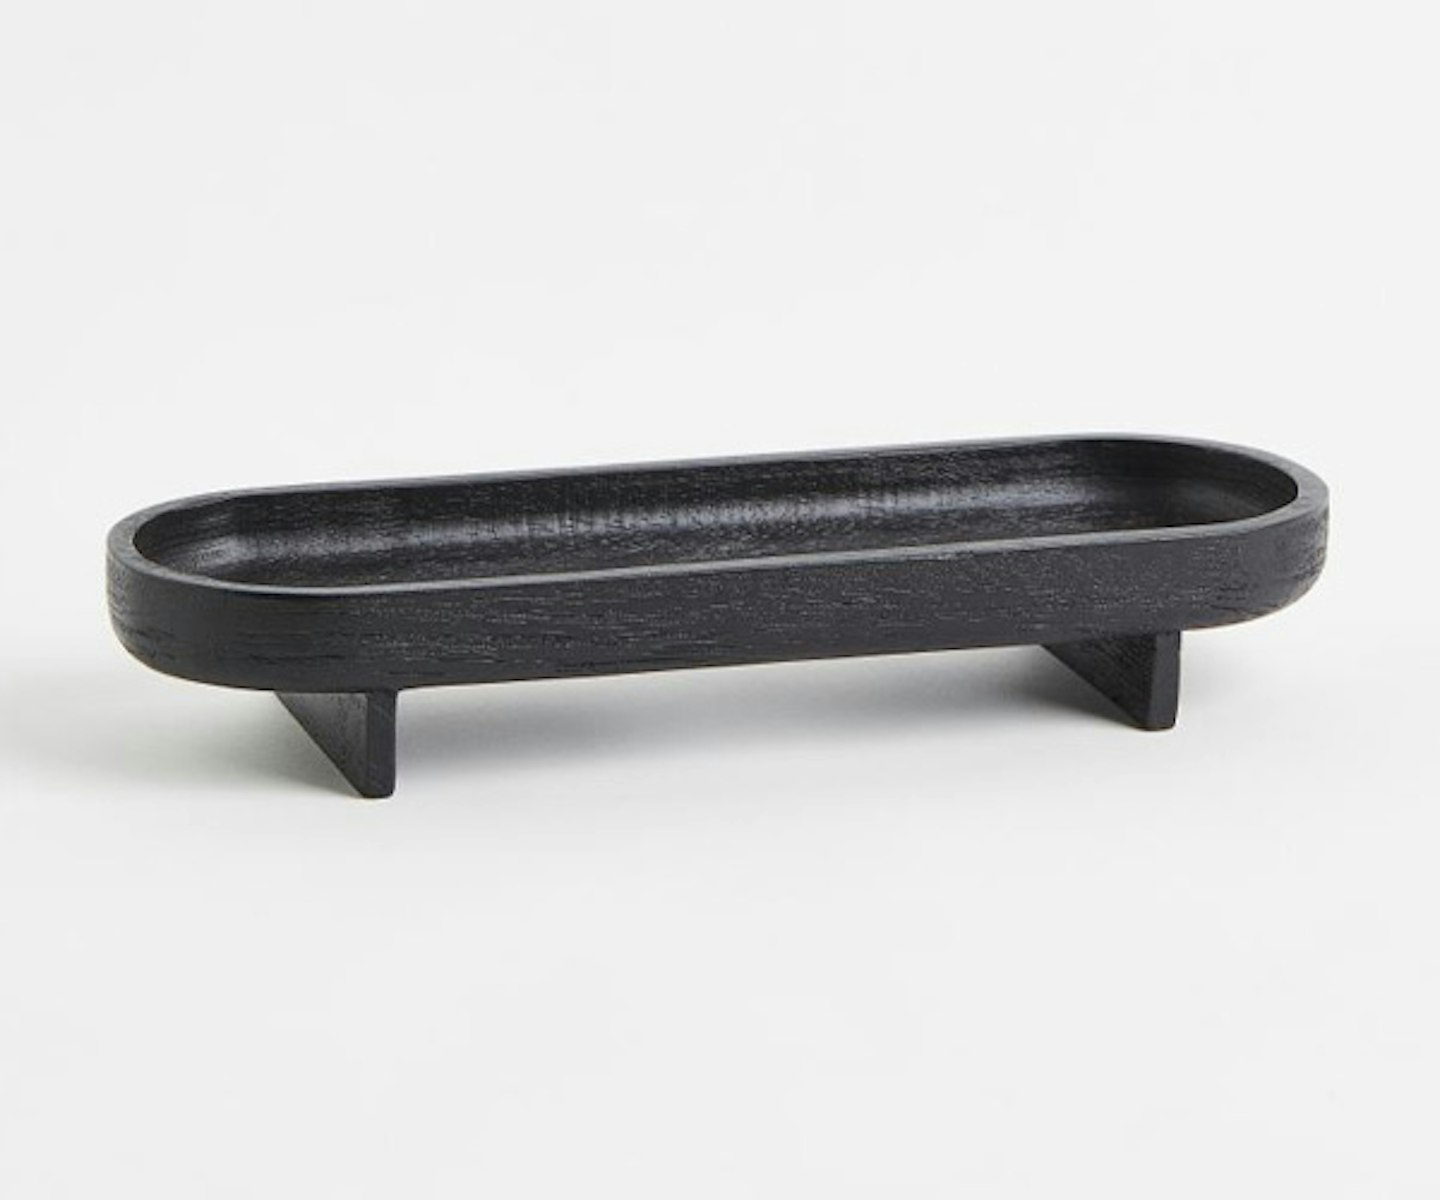 Oval wooden tray